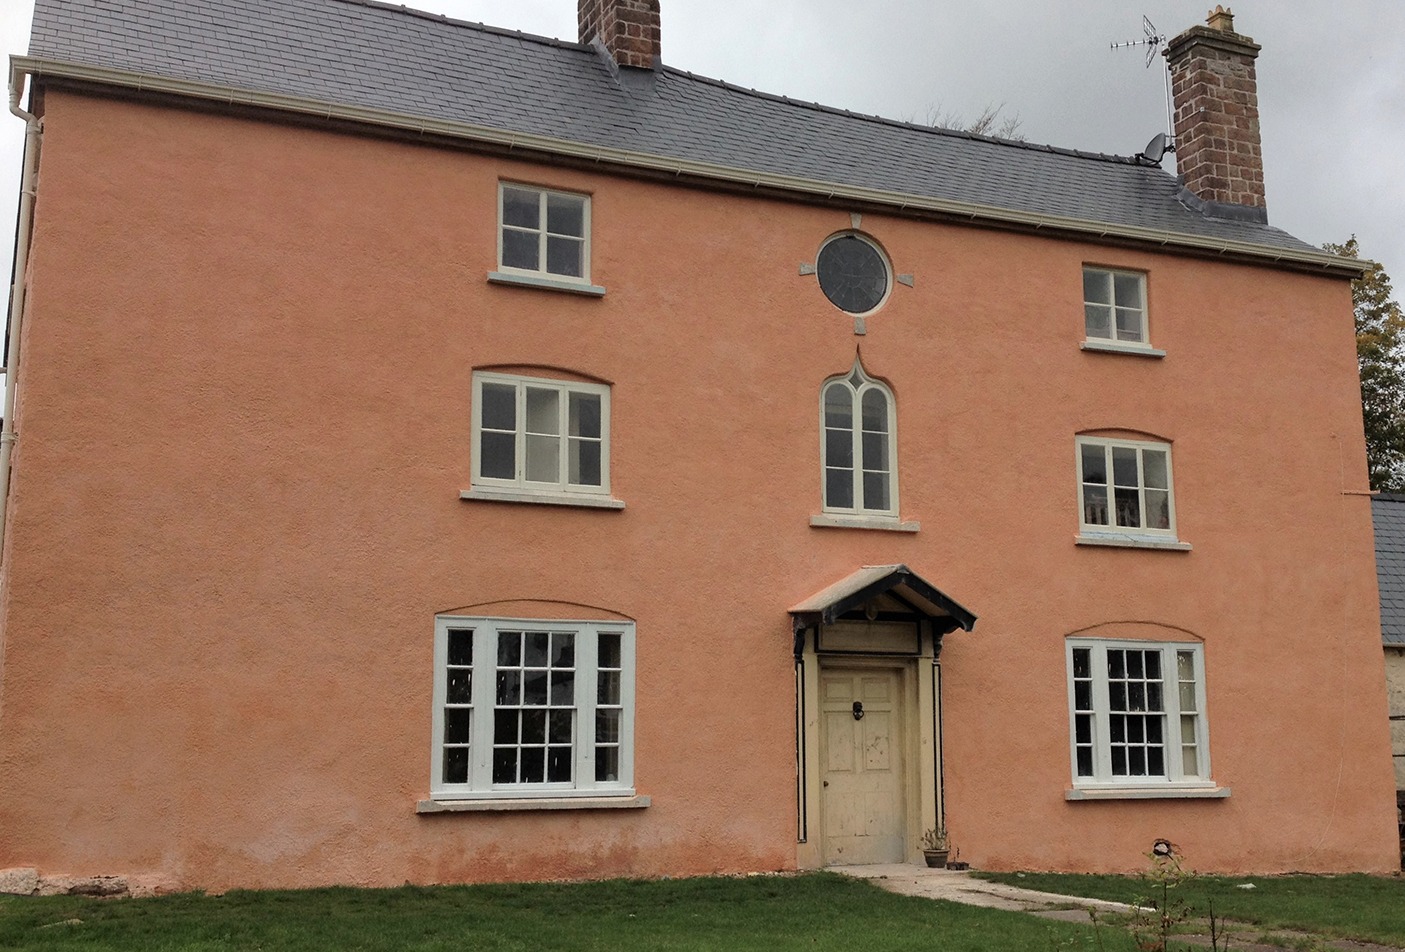 A property in Clearwell that was Roughcast and then lime washed in a traditional pink to celebrate the red ochre pigment mined in Clearwell Caves.